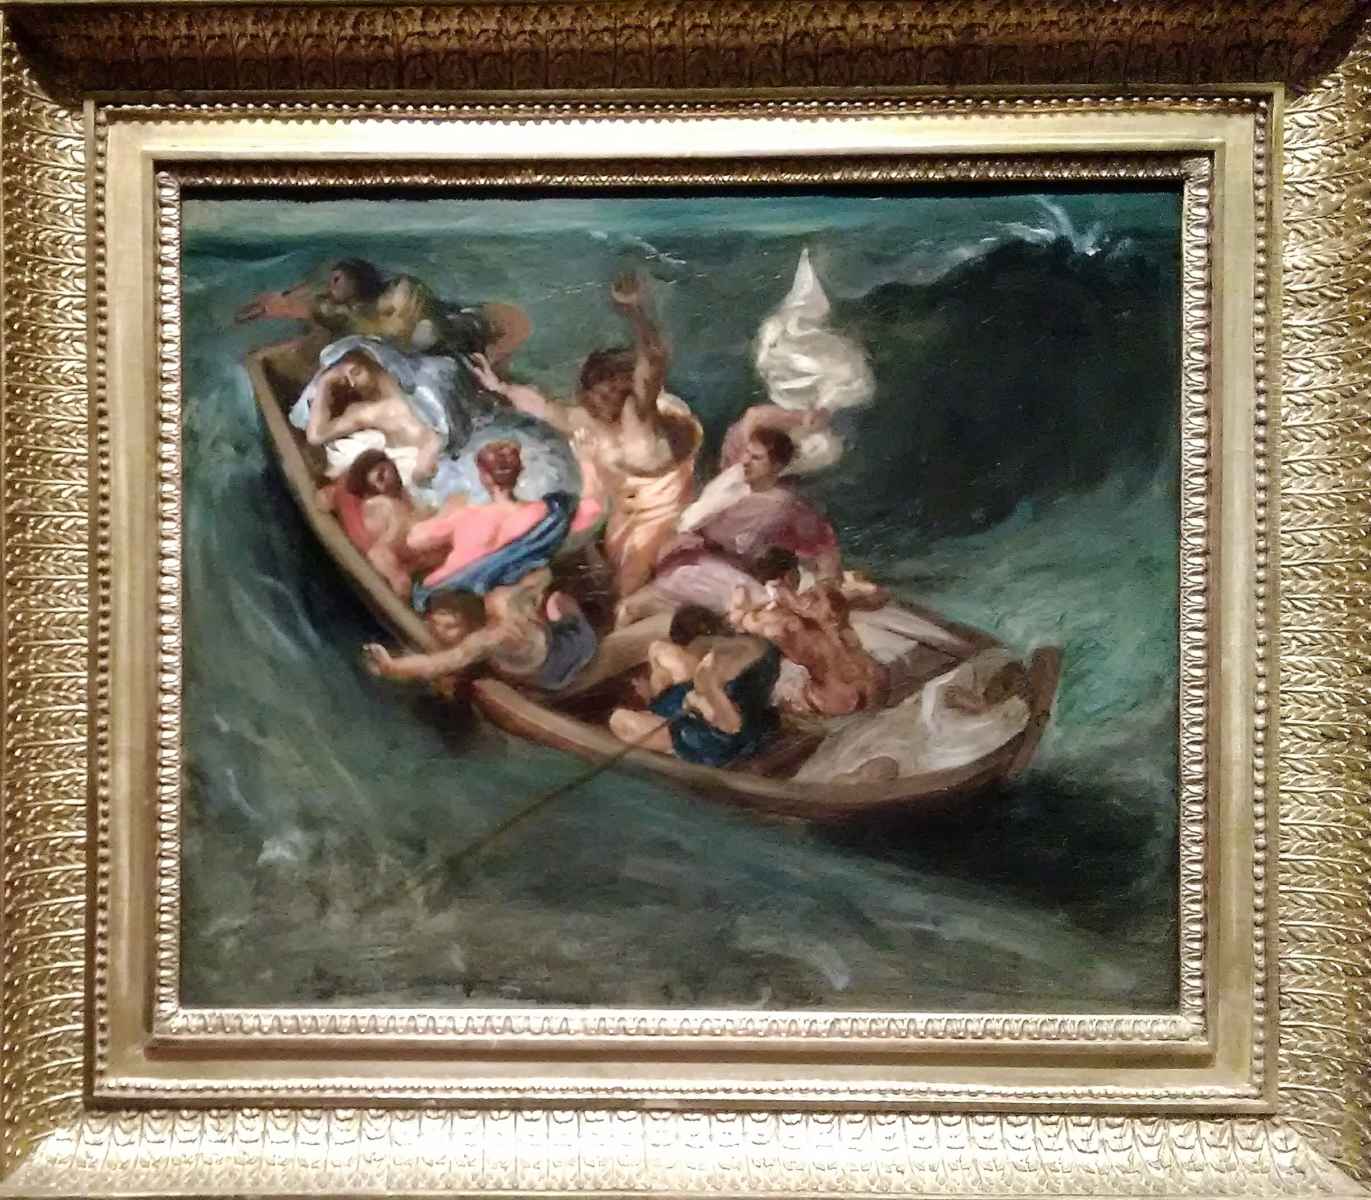 Disciples were disturbed when the storm swept over the boat